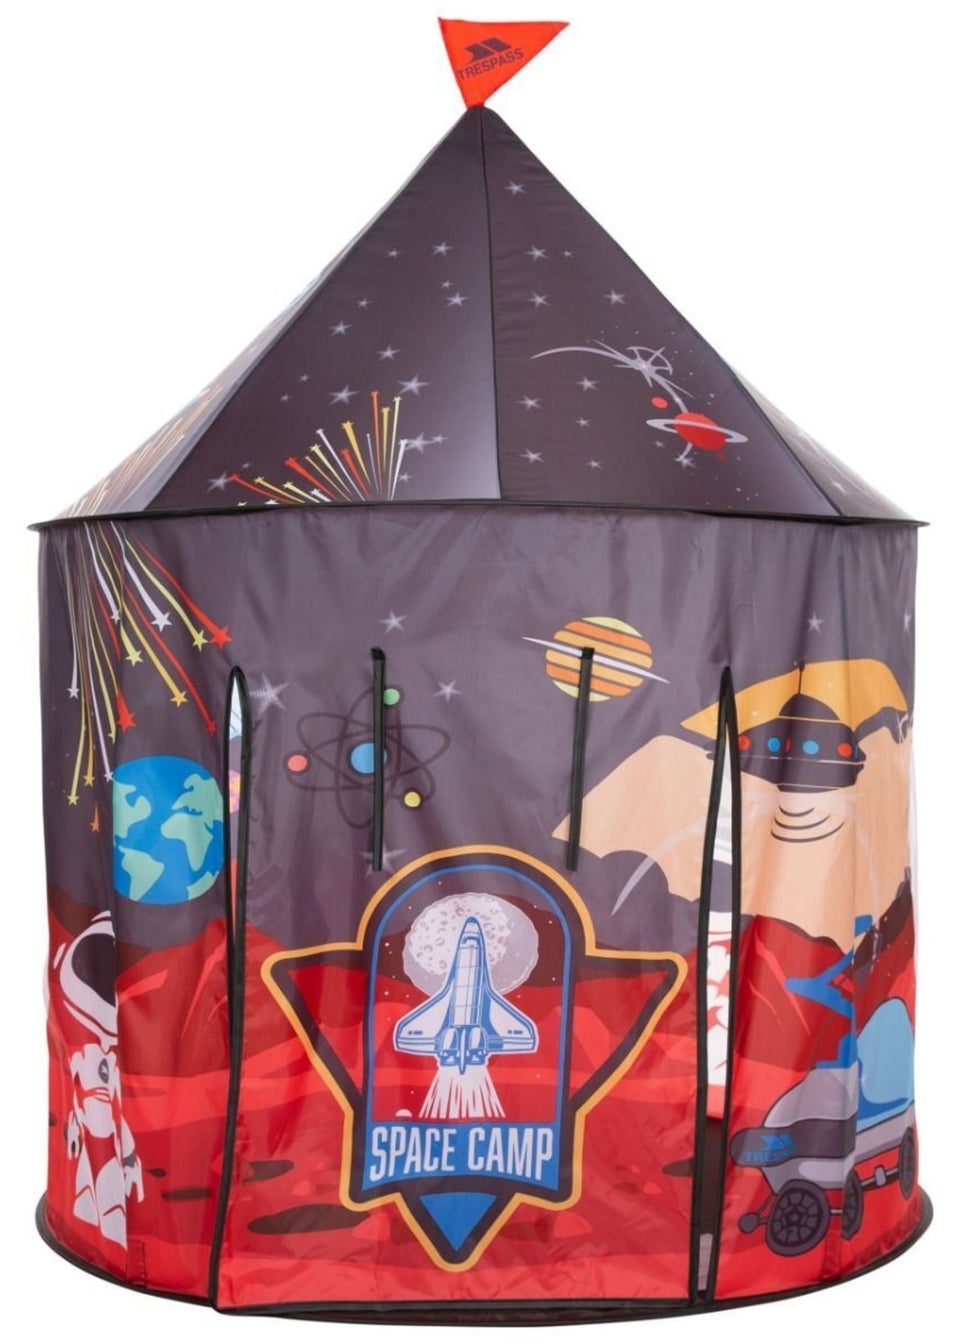 Trespass Kids Multi Colour Chateau Play Tent With Packaway Bag